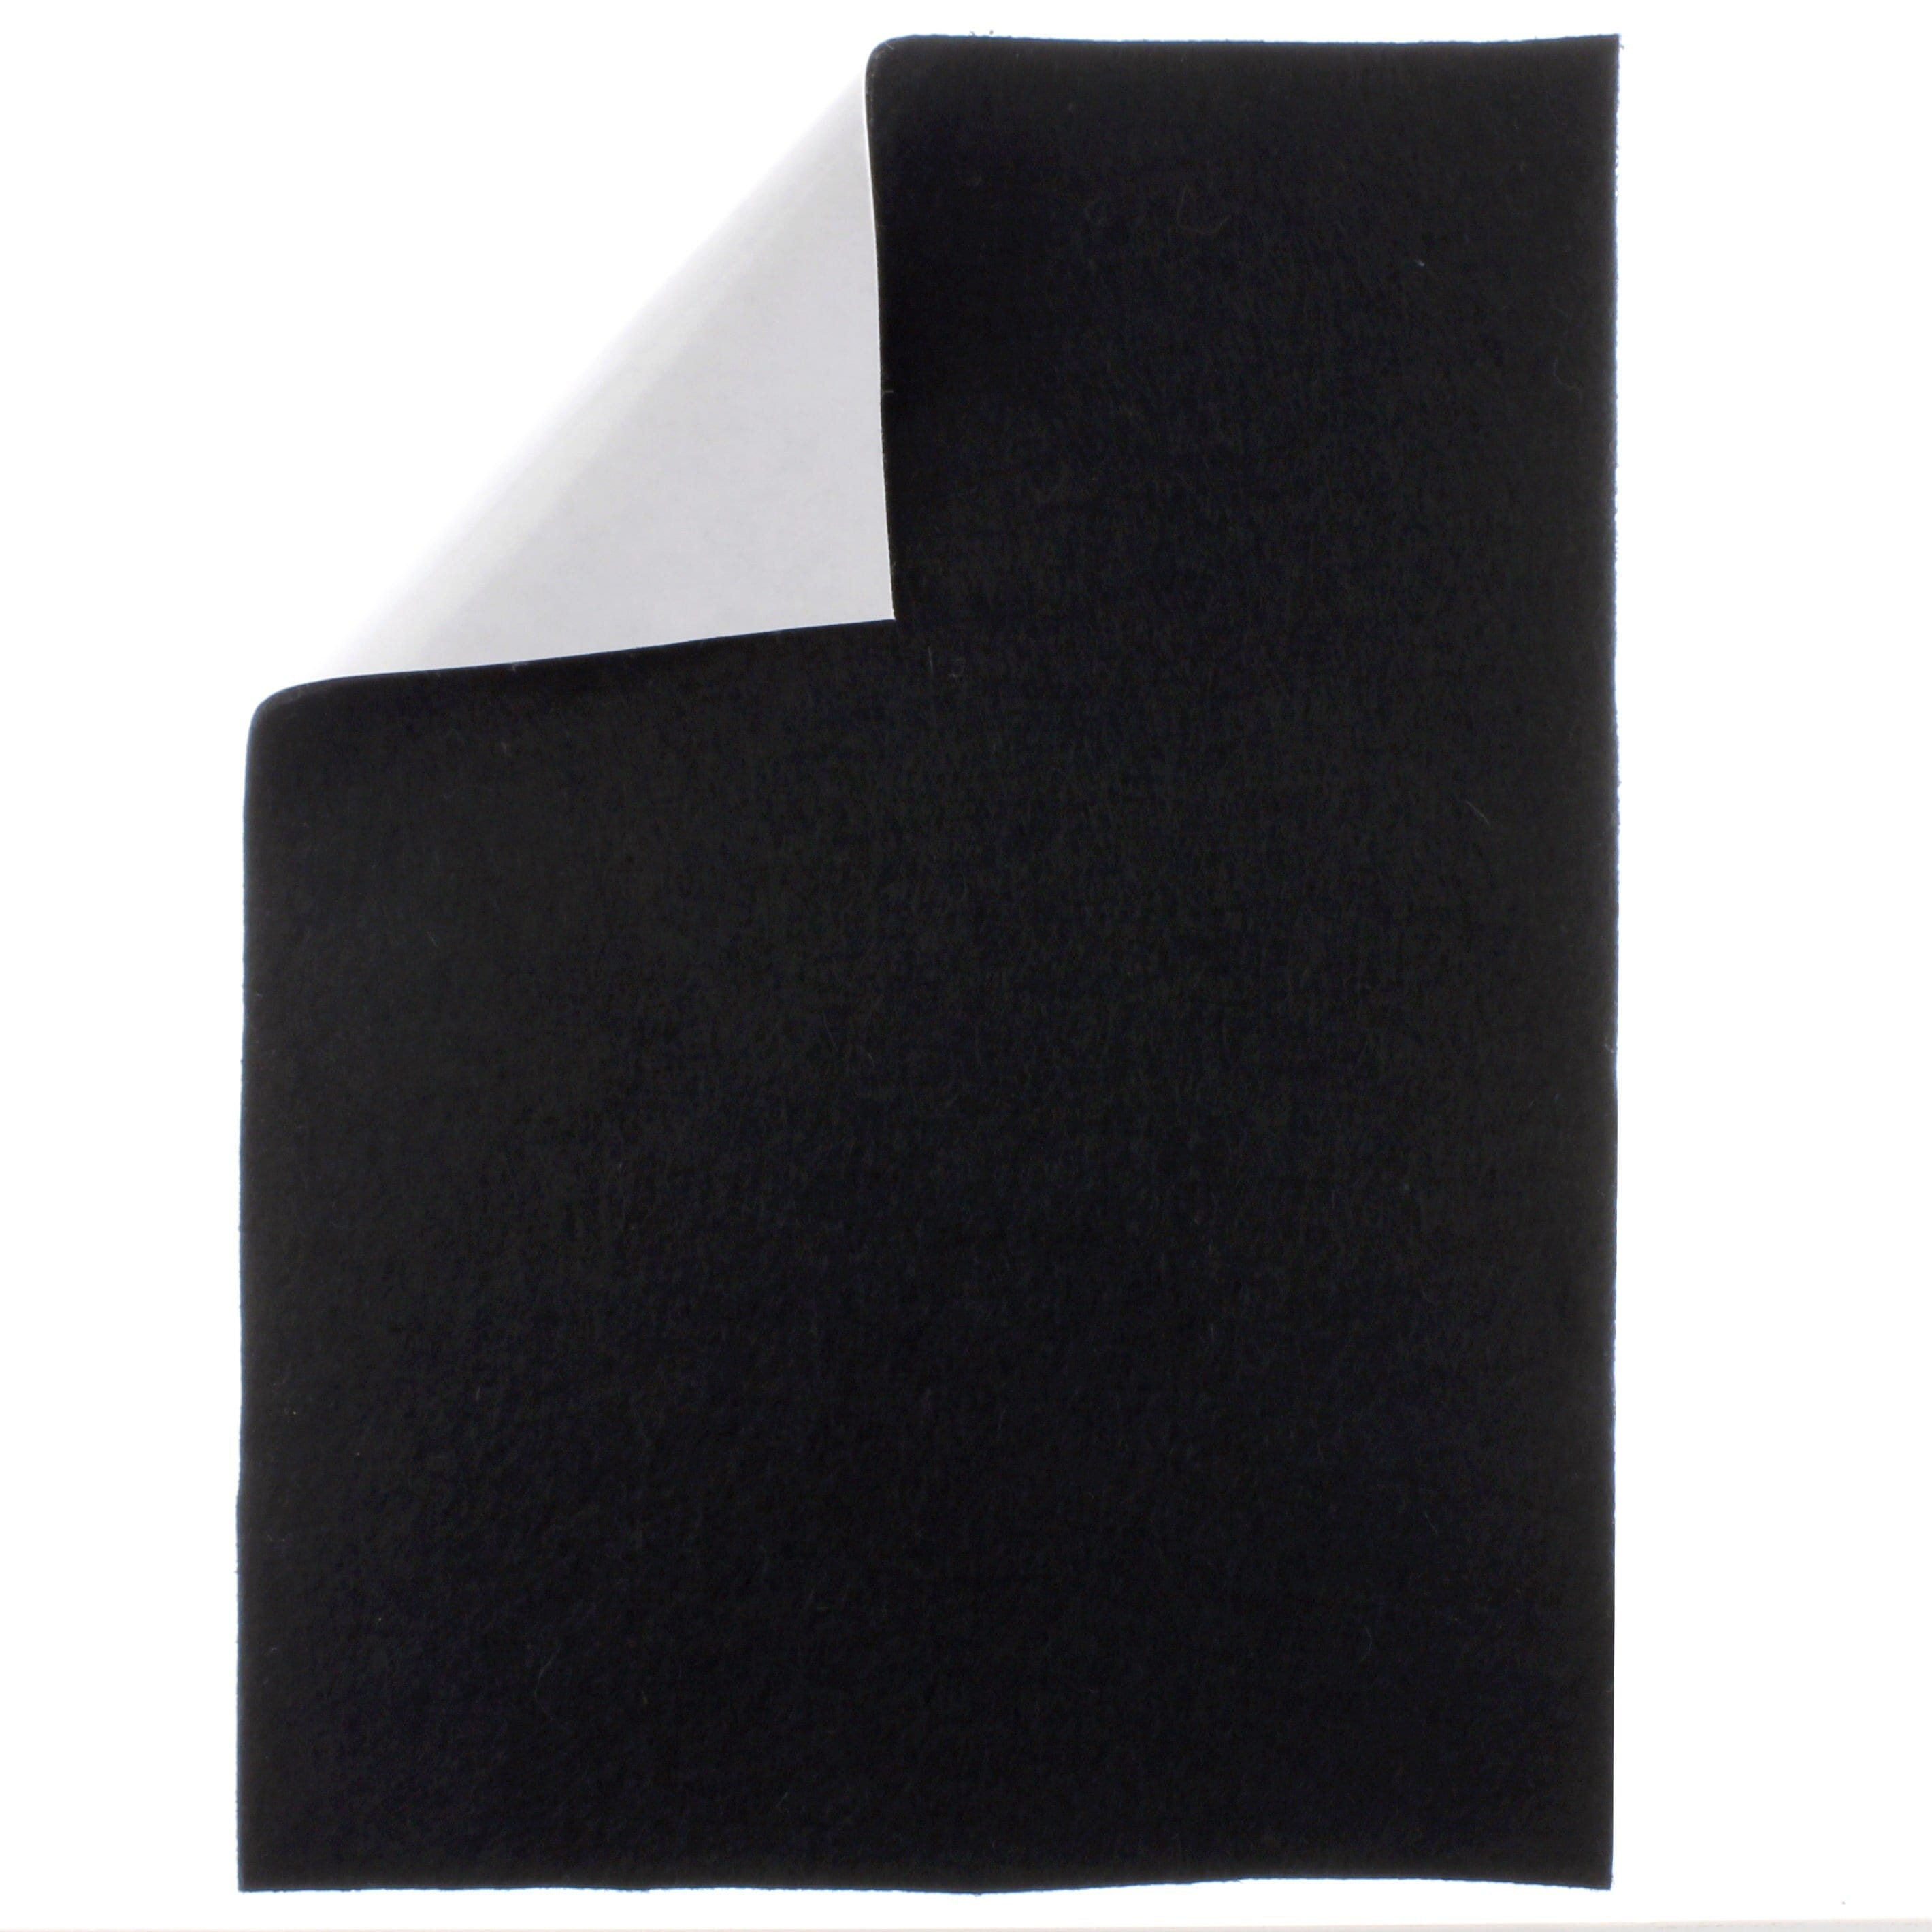 12 x 12 x 1/8 Thickness Adhesive Black Felt Sheets Sticky Felt Fabric  Pads for Art and Home Making (8 Pieces)